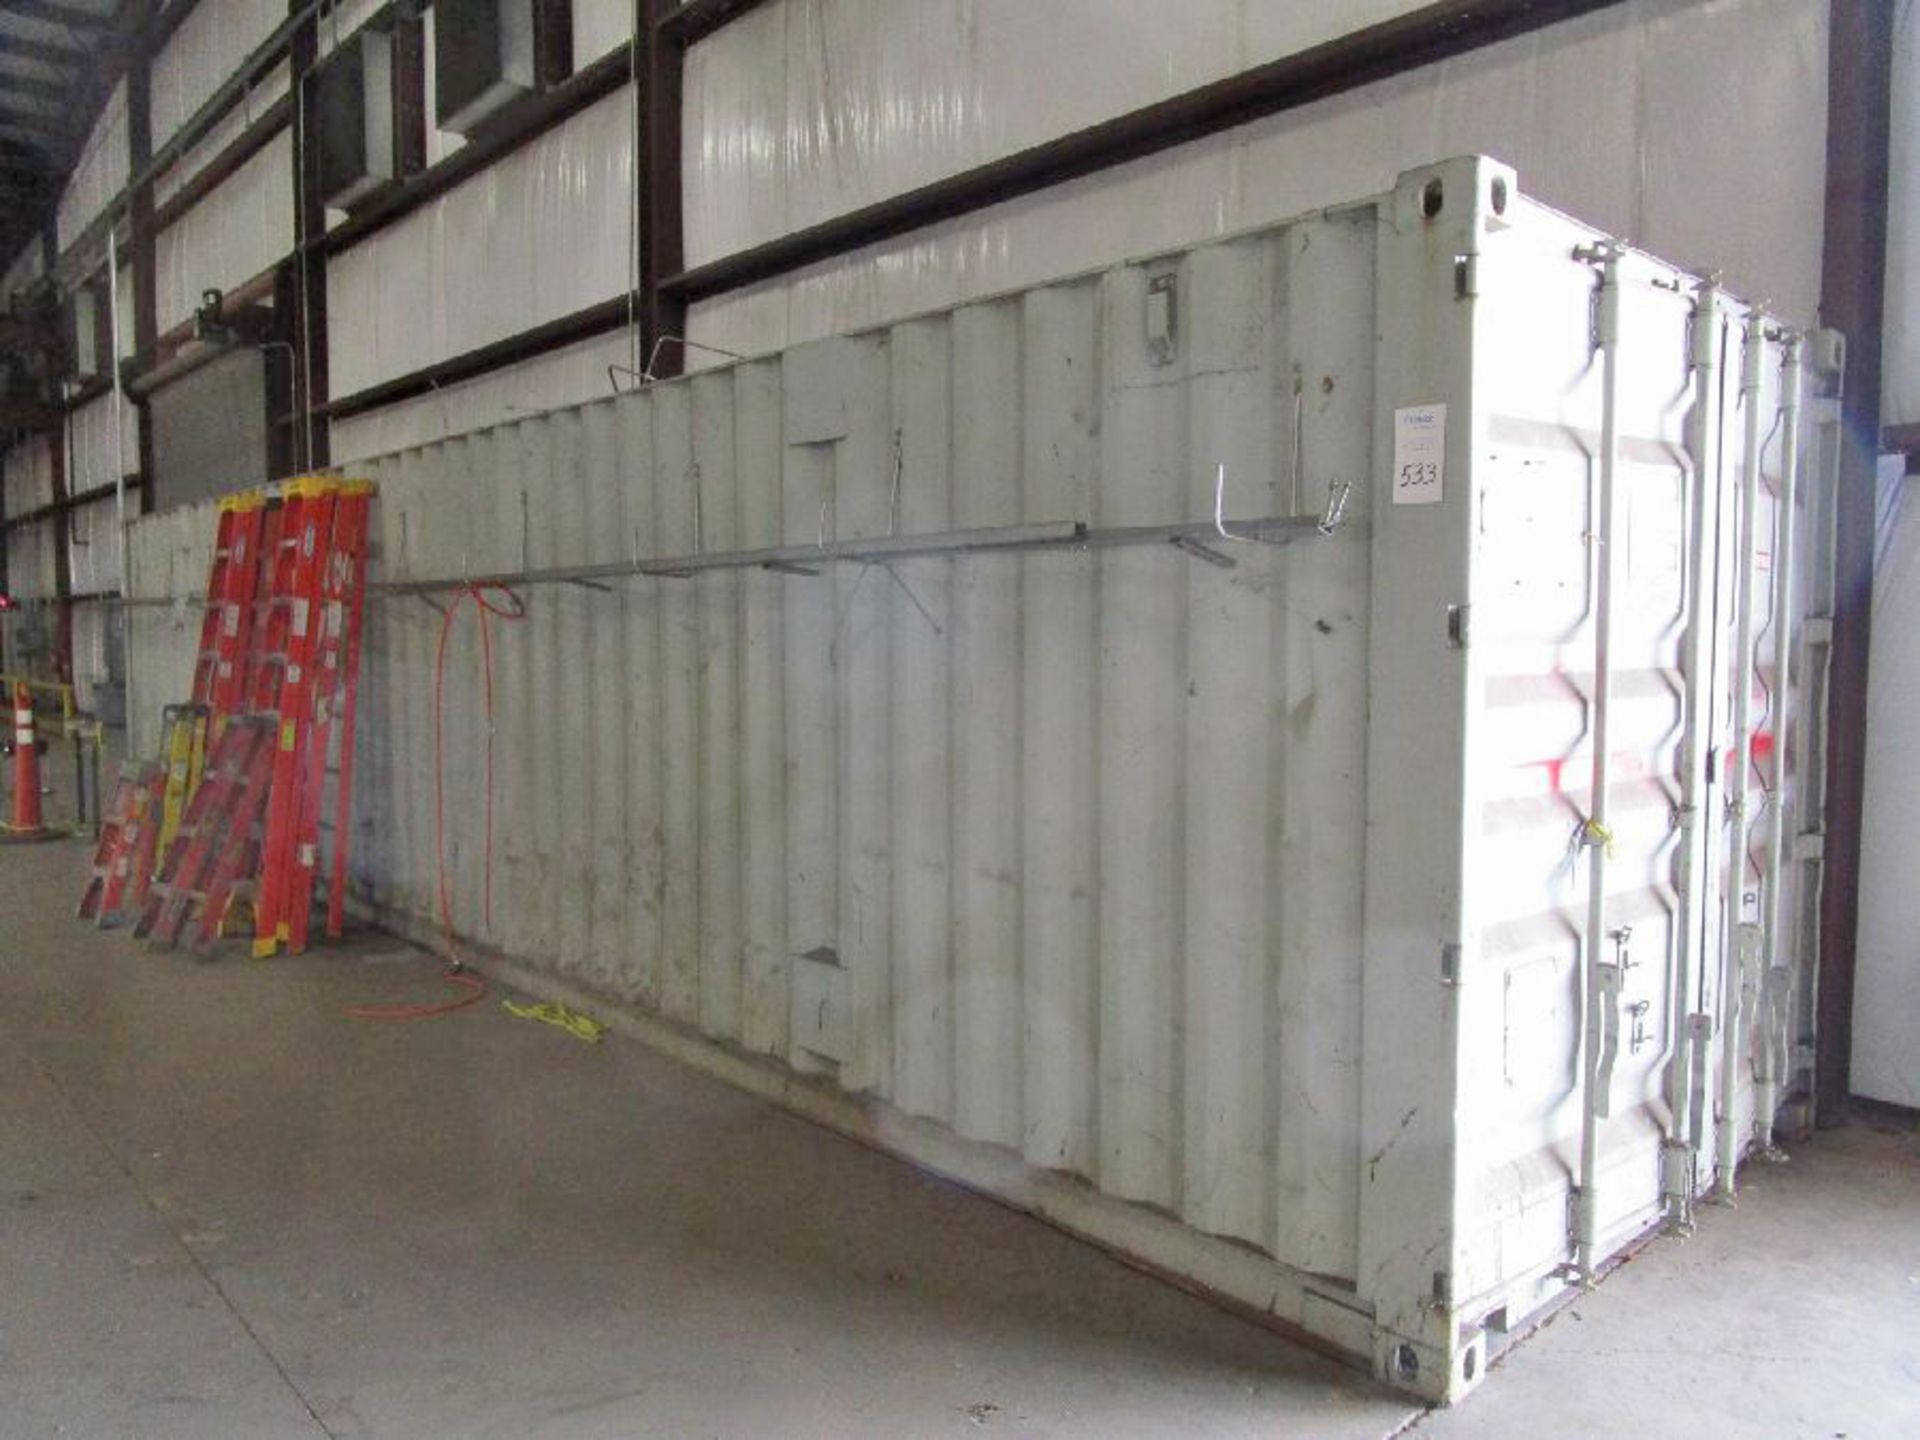 Oversea Shipping Container - Image 2 of 14